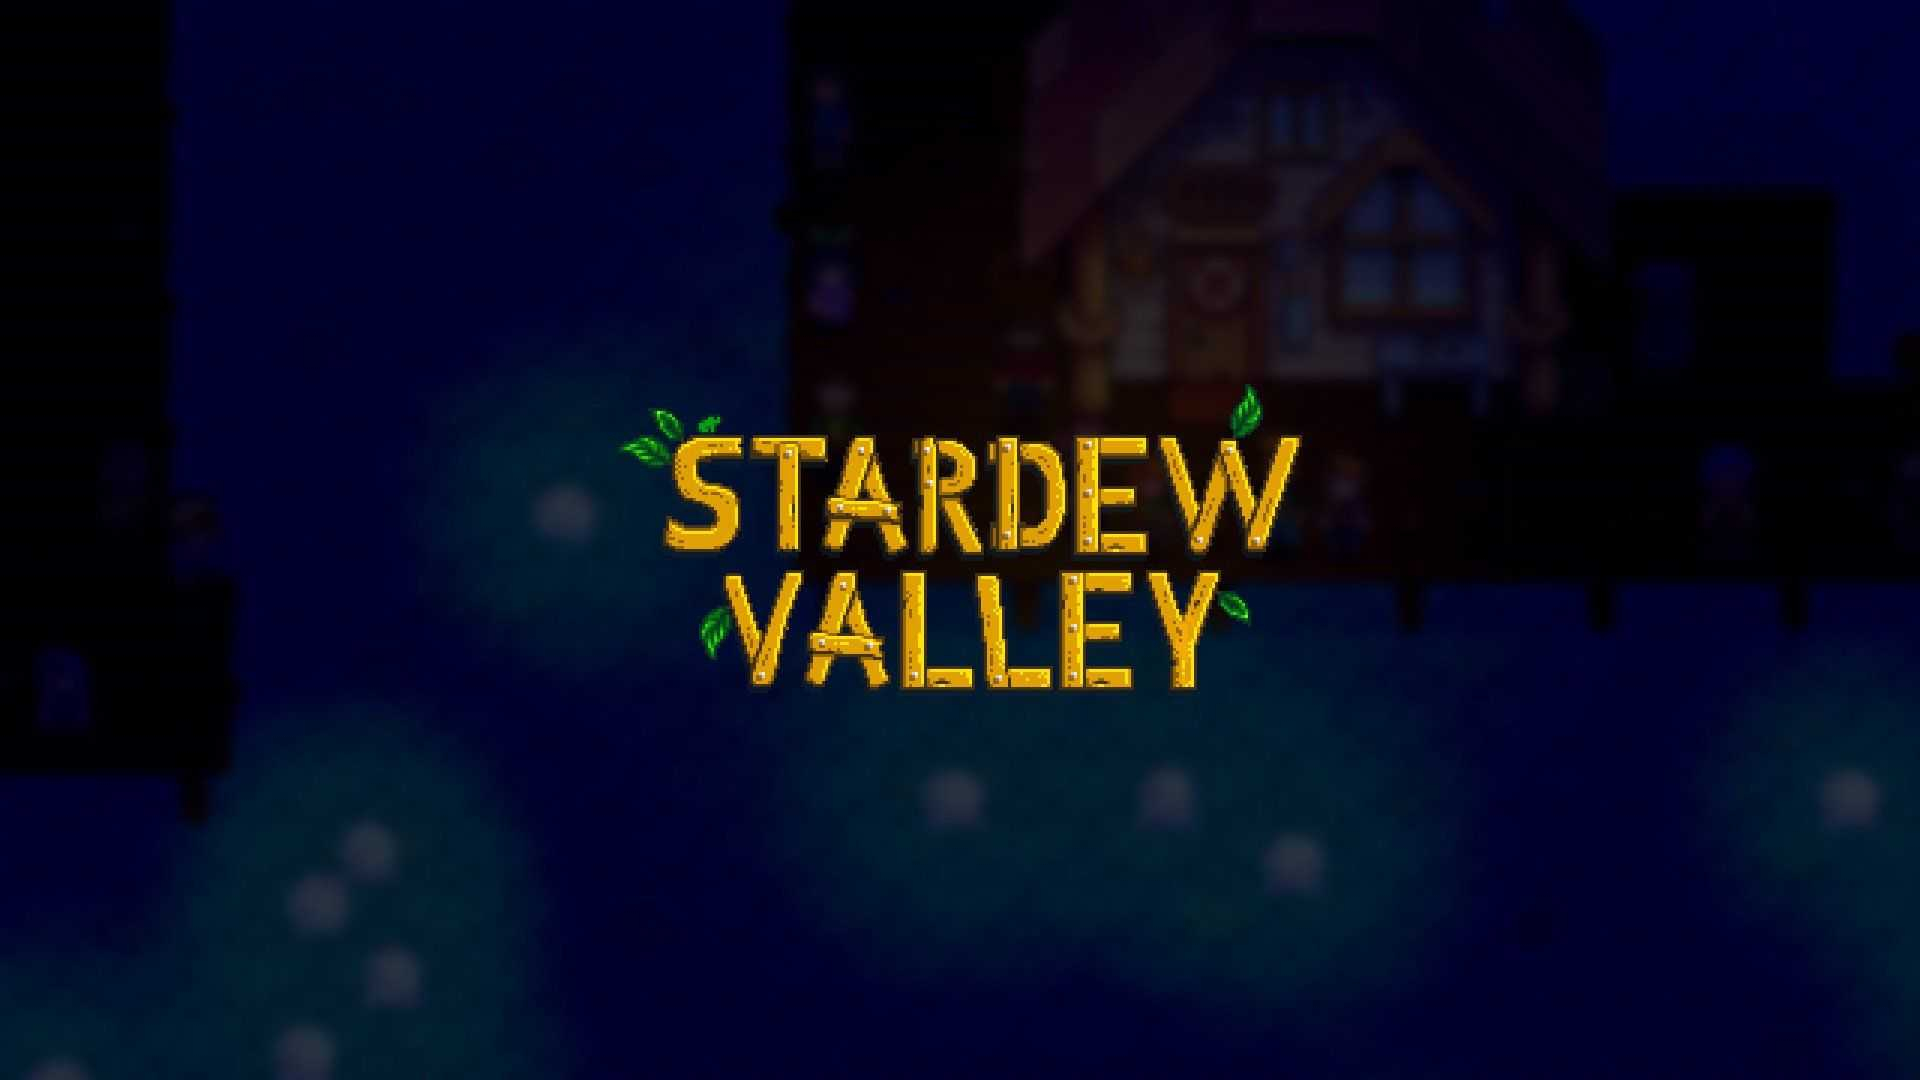 1920x1080 Stardew Valley Wallpaper Awesome Free HD Wallpapers